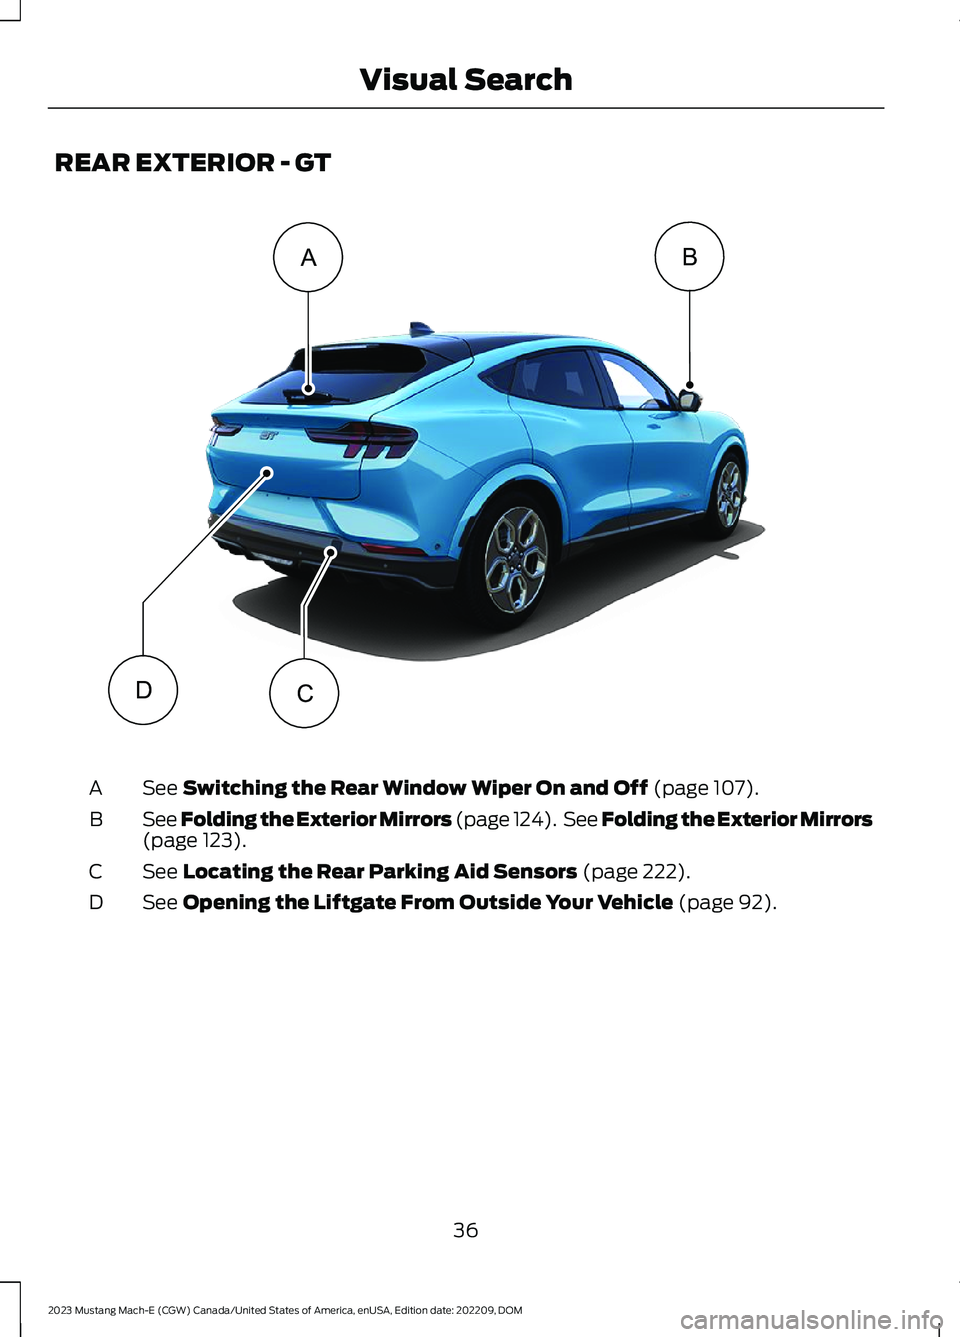 FORD MUSTANG MACH E 2023  Owners Manual REAR EXTERIOR - GT
See Switching the Rear Window Wiper On and Off (page 107).A
See Folding the Exterior Mirrors (page 124). See Folding the Exterior Mirrors(page 123).B
See Locating the Rear Parking A